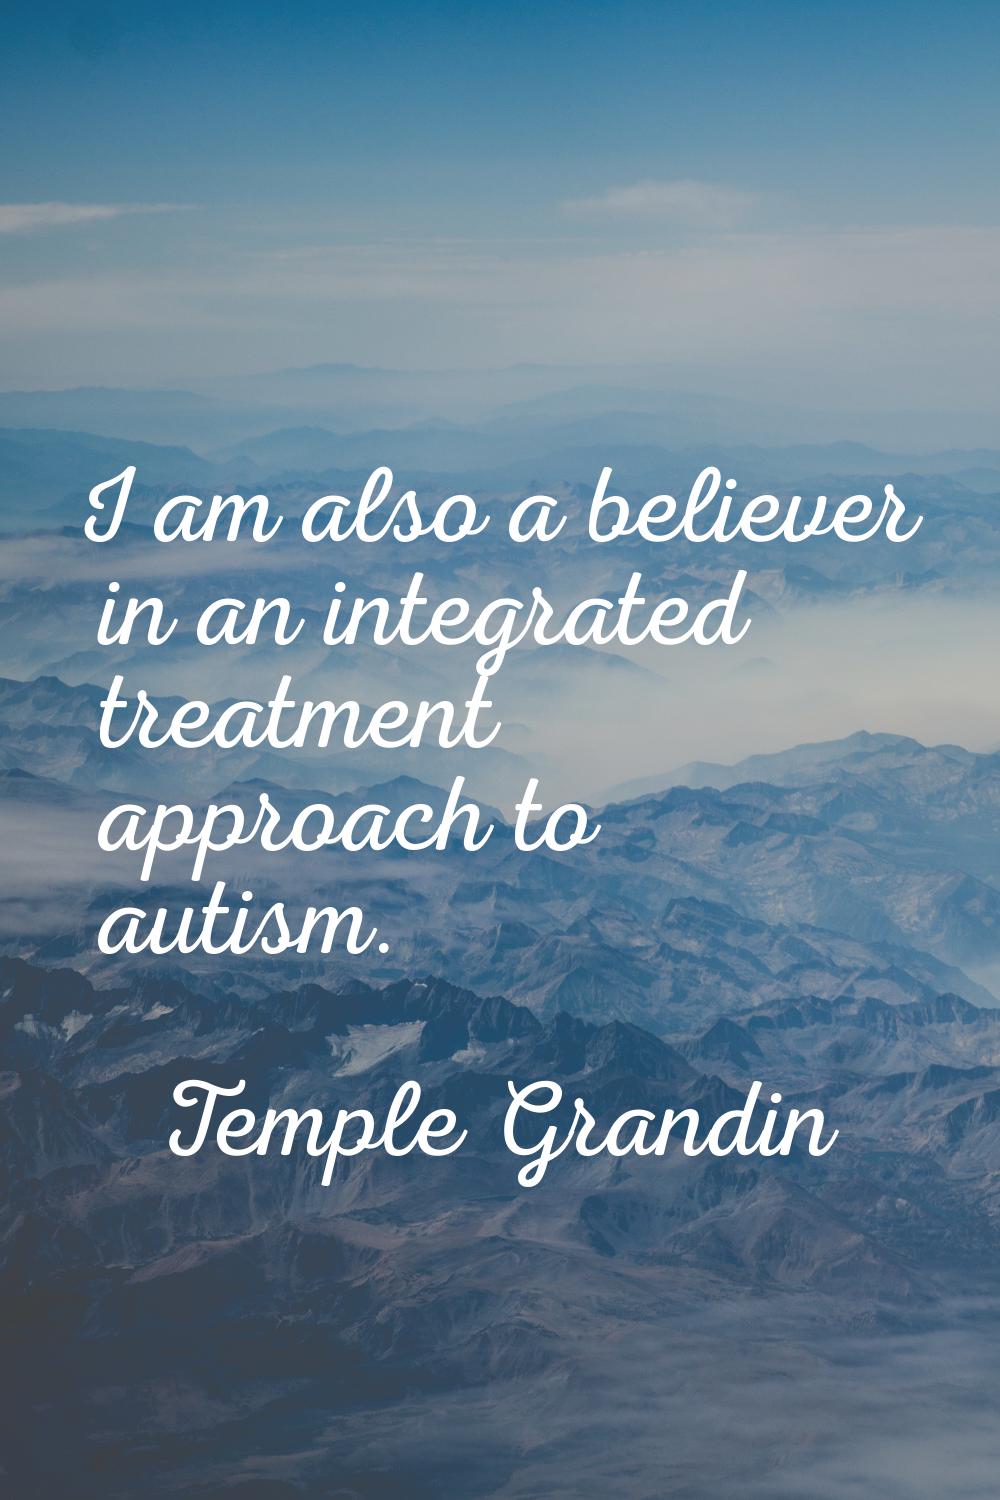 I am also a believer in an integrated treatment approach to autism.